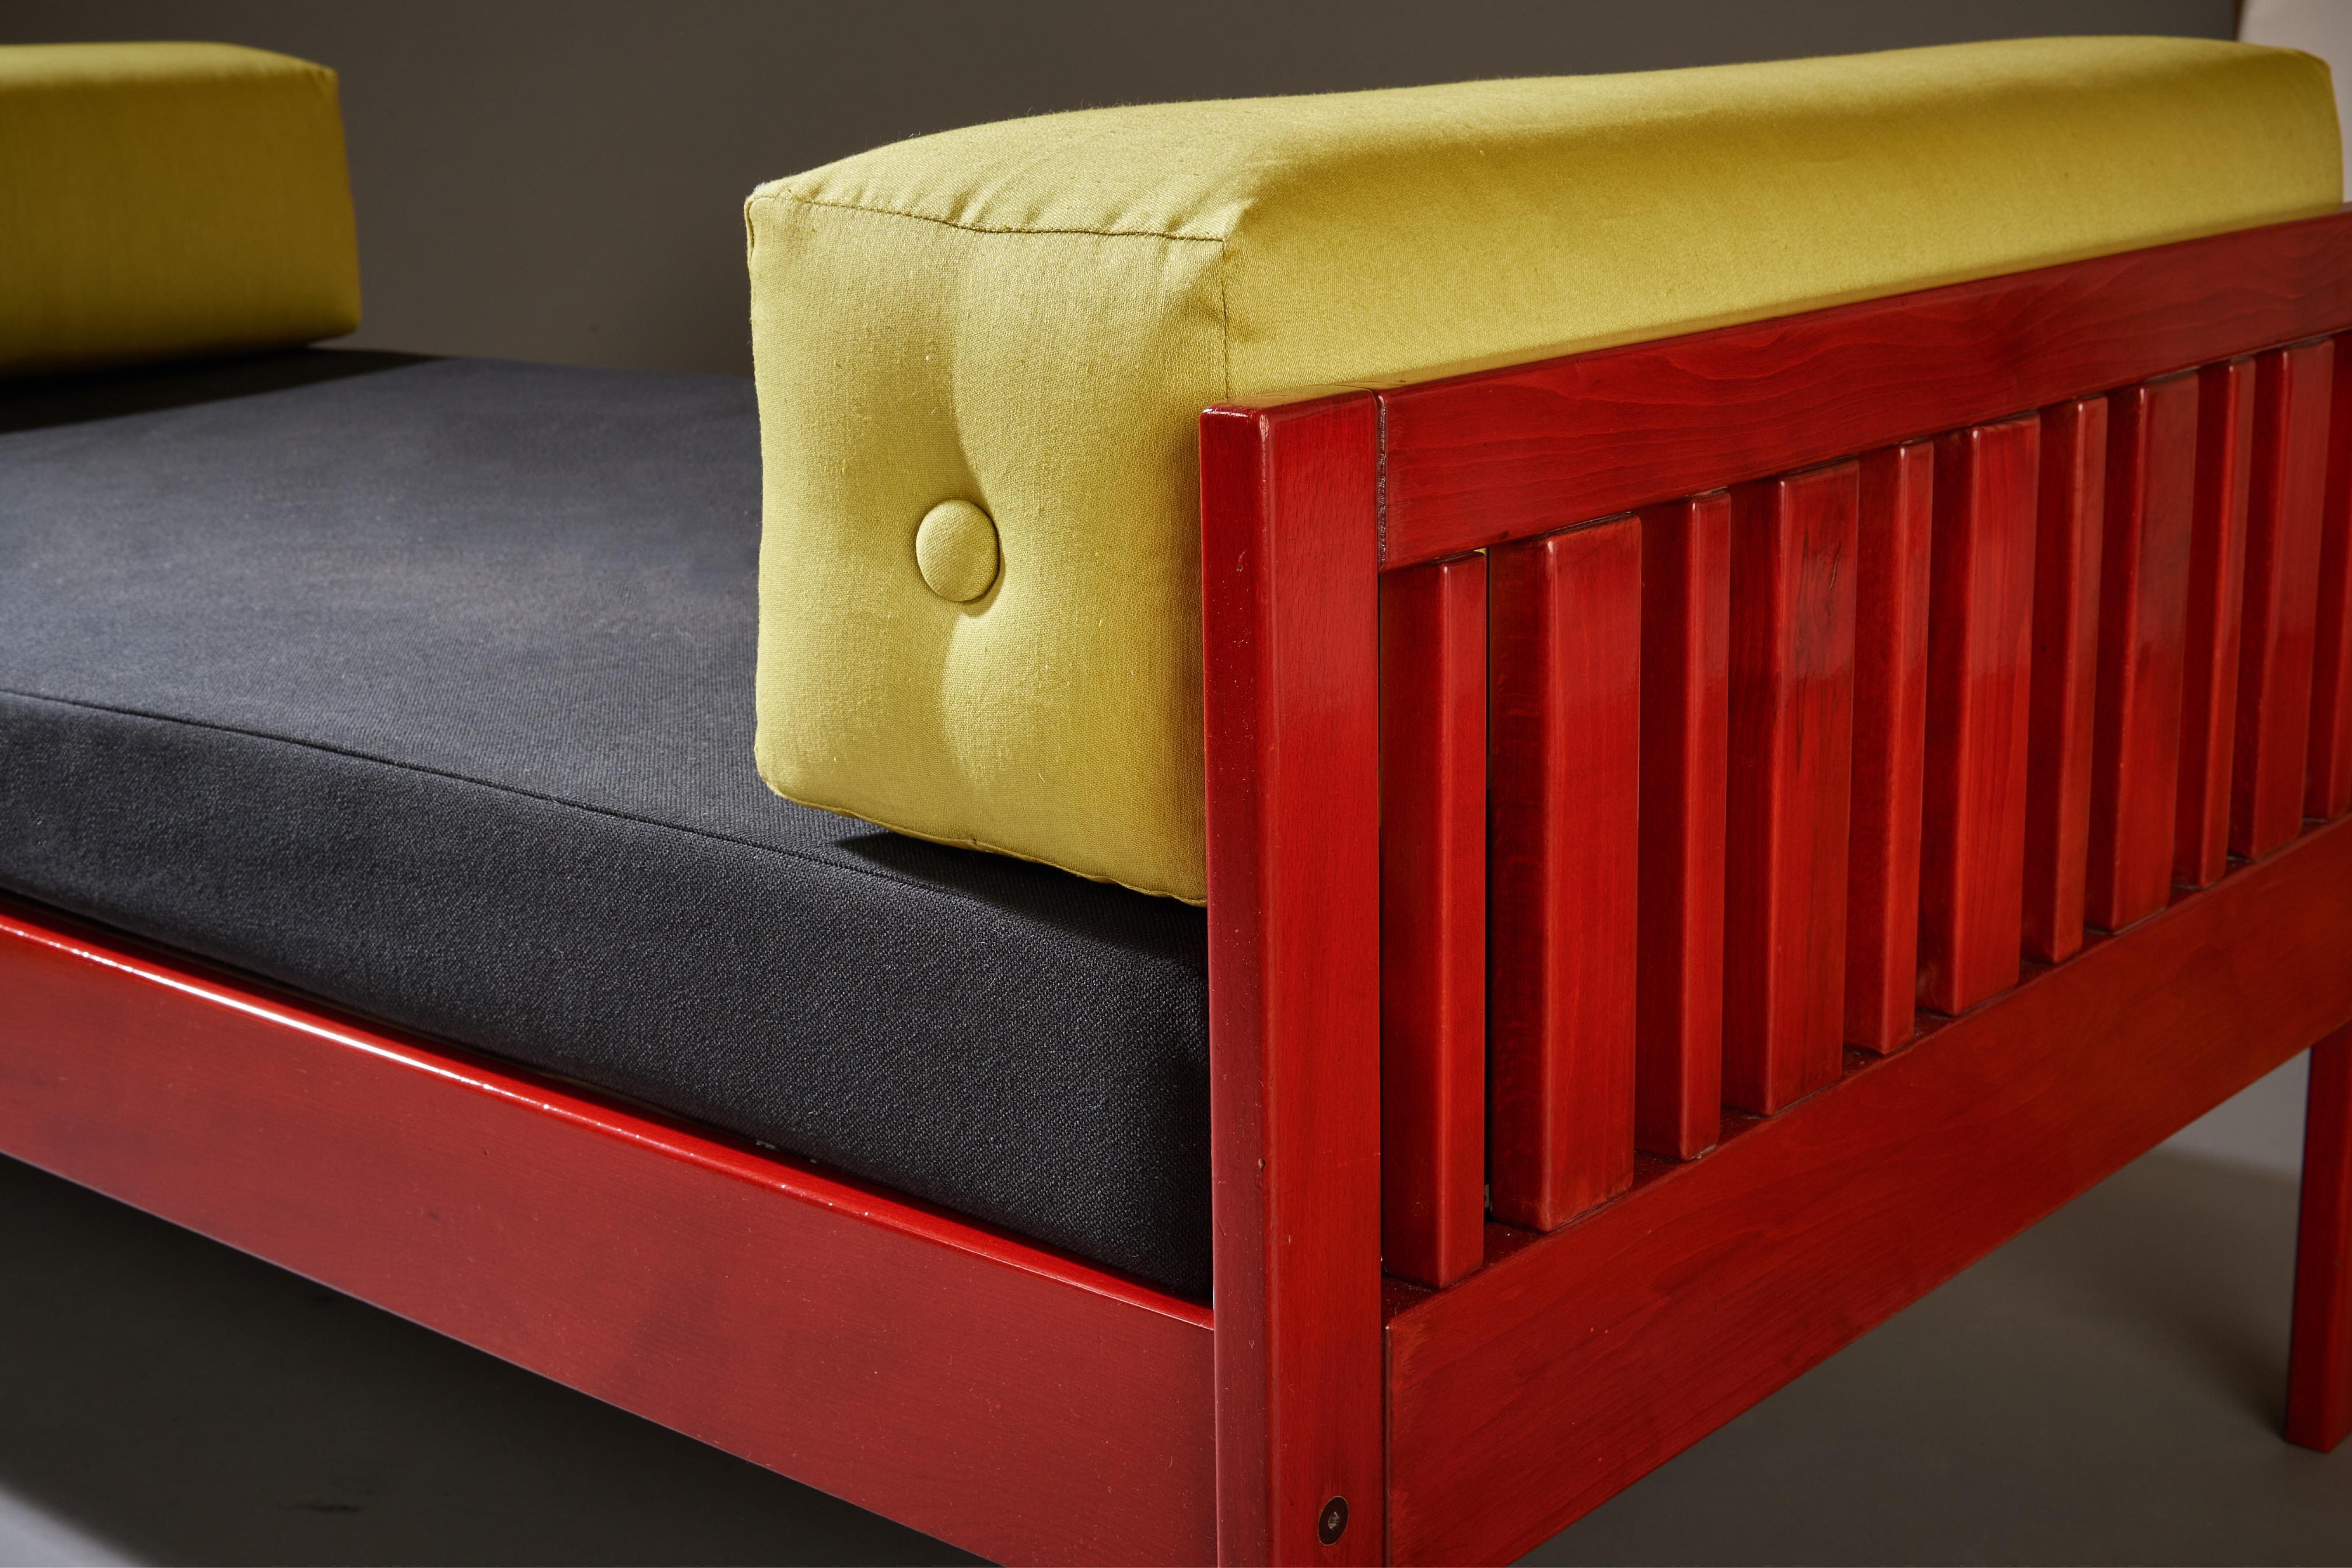 Ettore Sottsass Daybed, Red Lacquered Wood, Chartreuse Upholstery, Italy c. 1962 For Sale 7